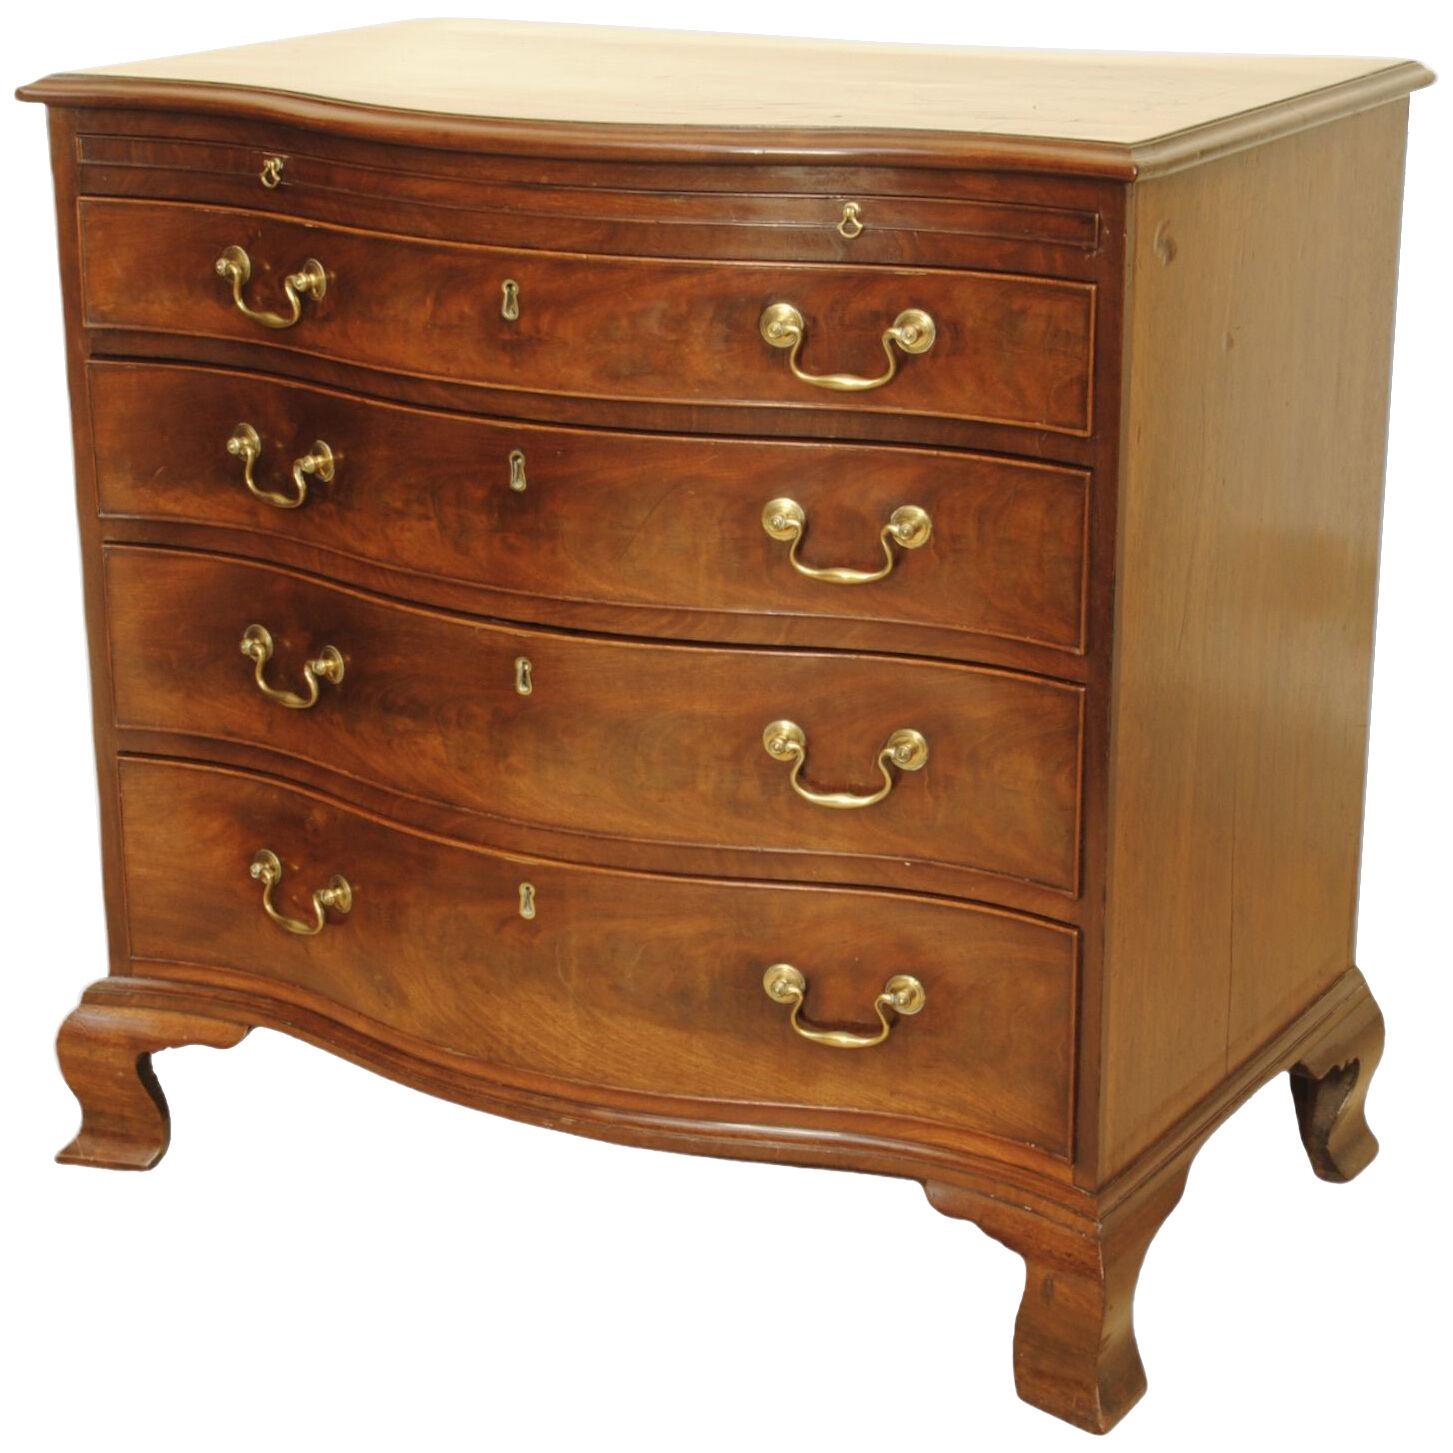 A FINE AND SMALL 18TH CENTURY SERPENTINE CHEST OF DRAWERS